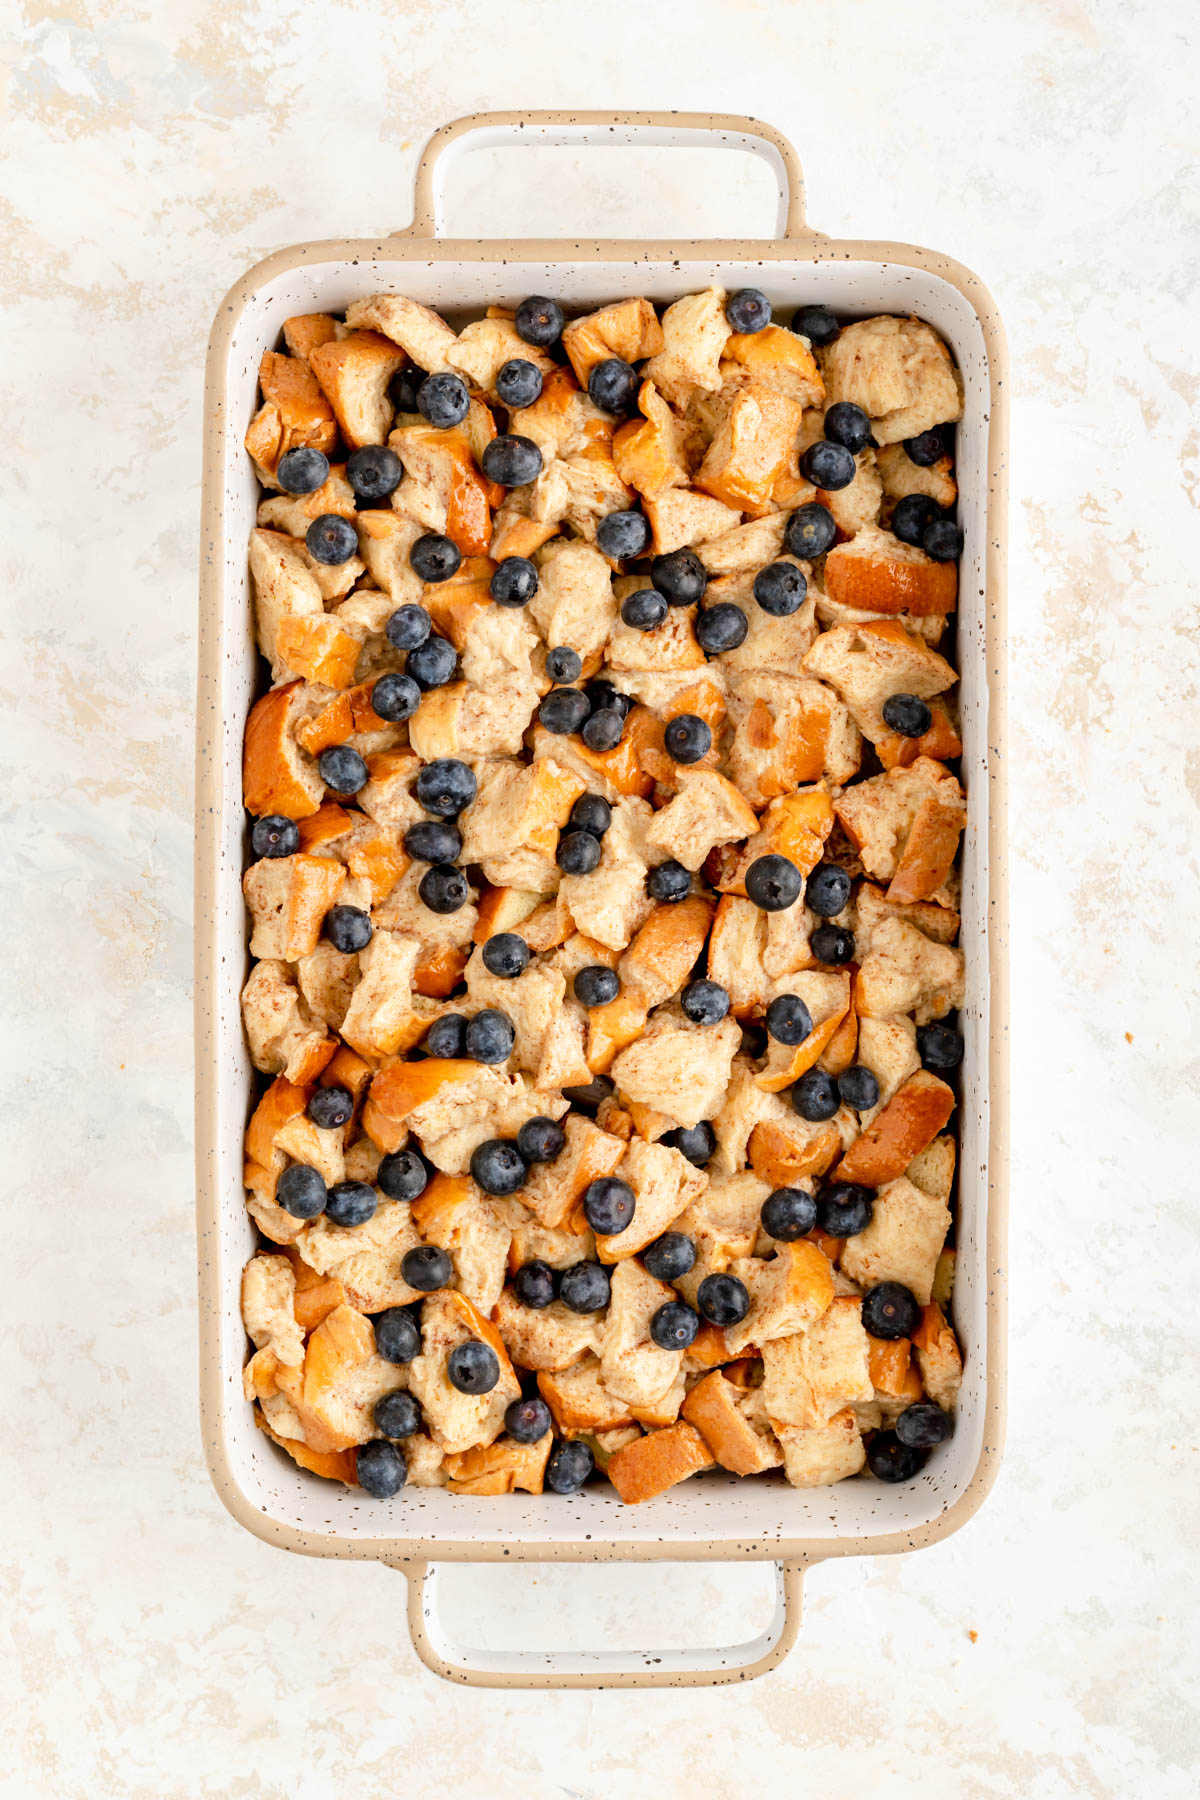 white and tan ceramic rectangular pan filled with bread pieces topped with fresh blueberries.